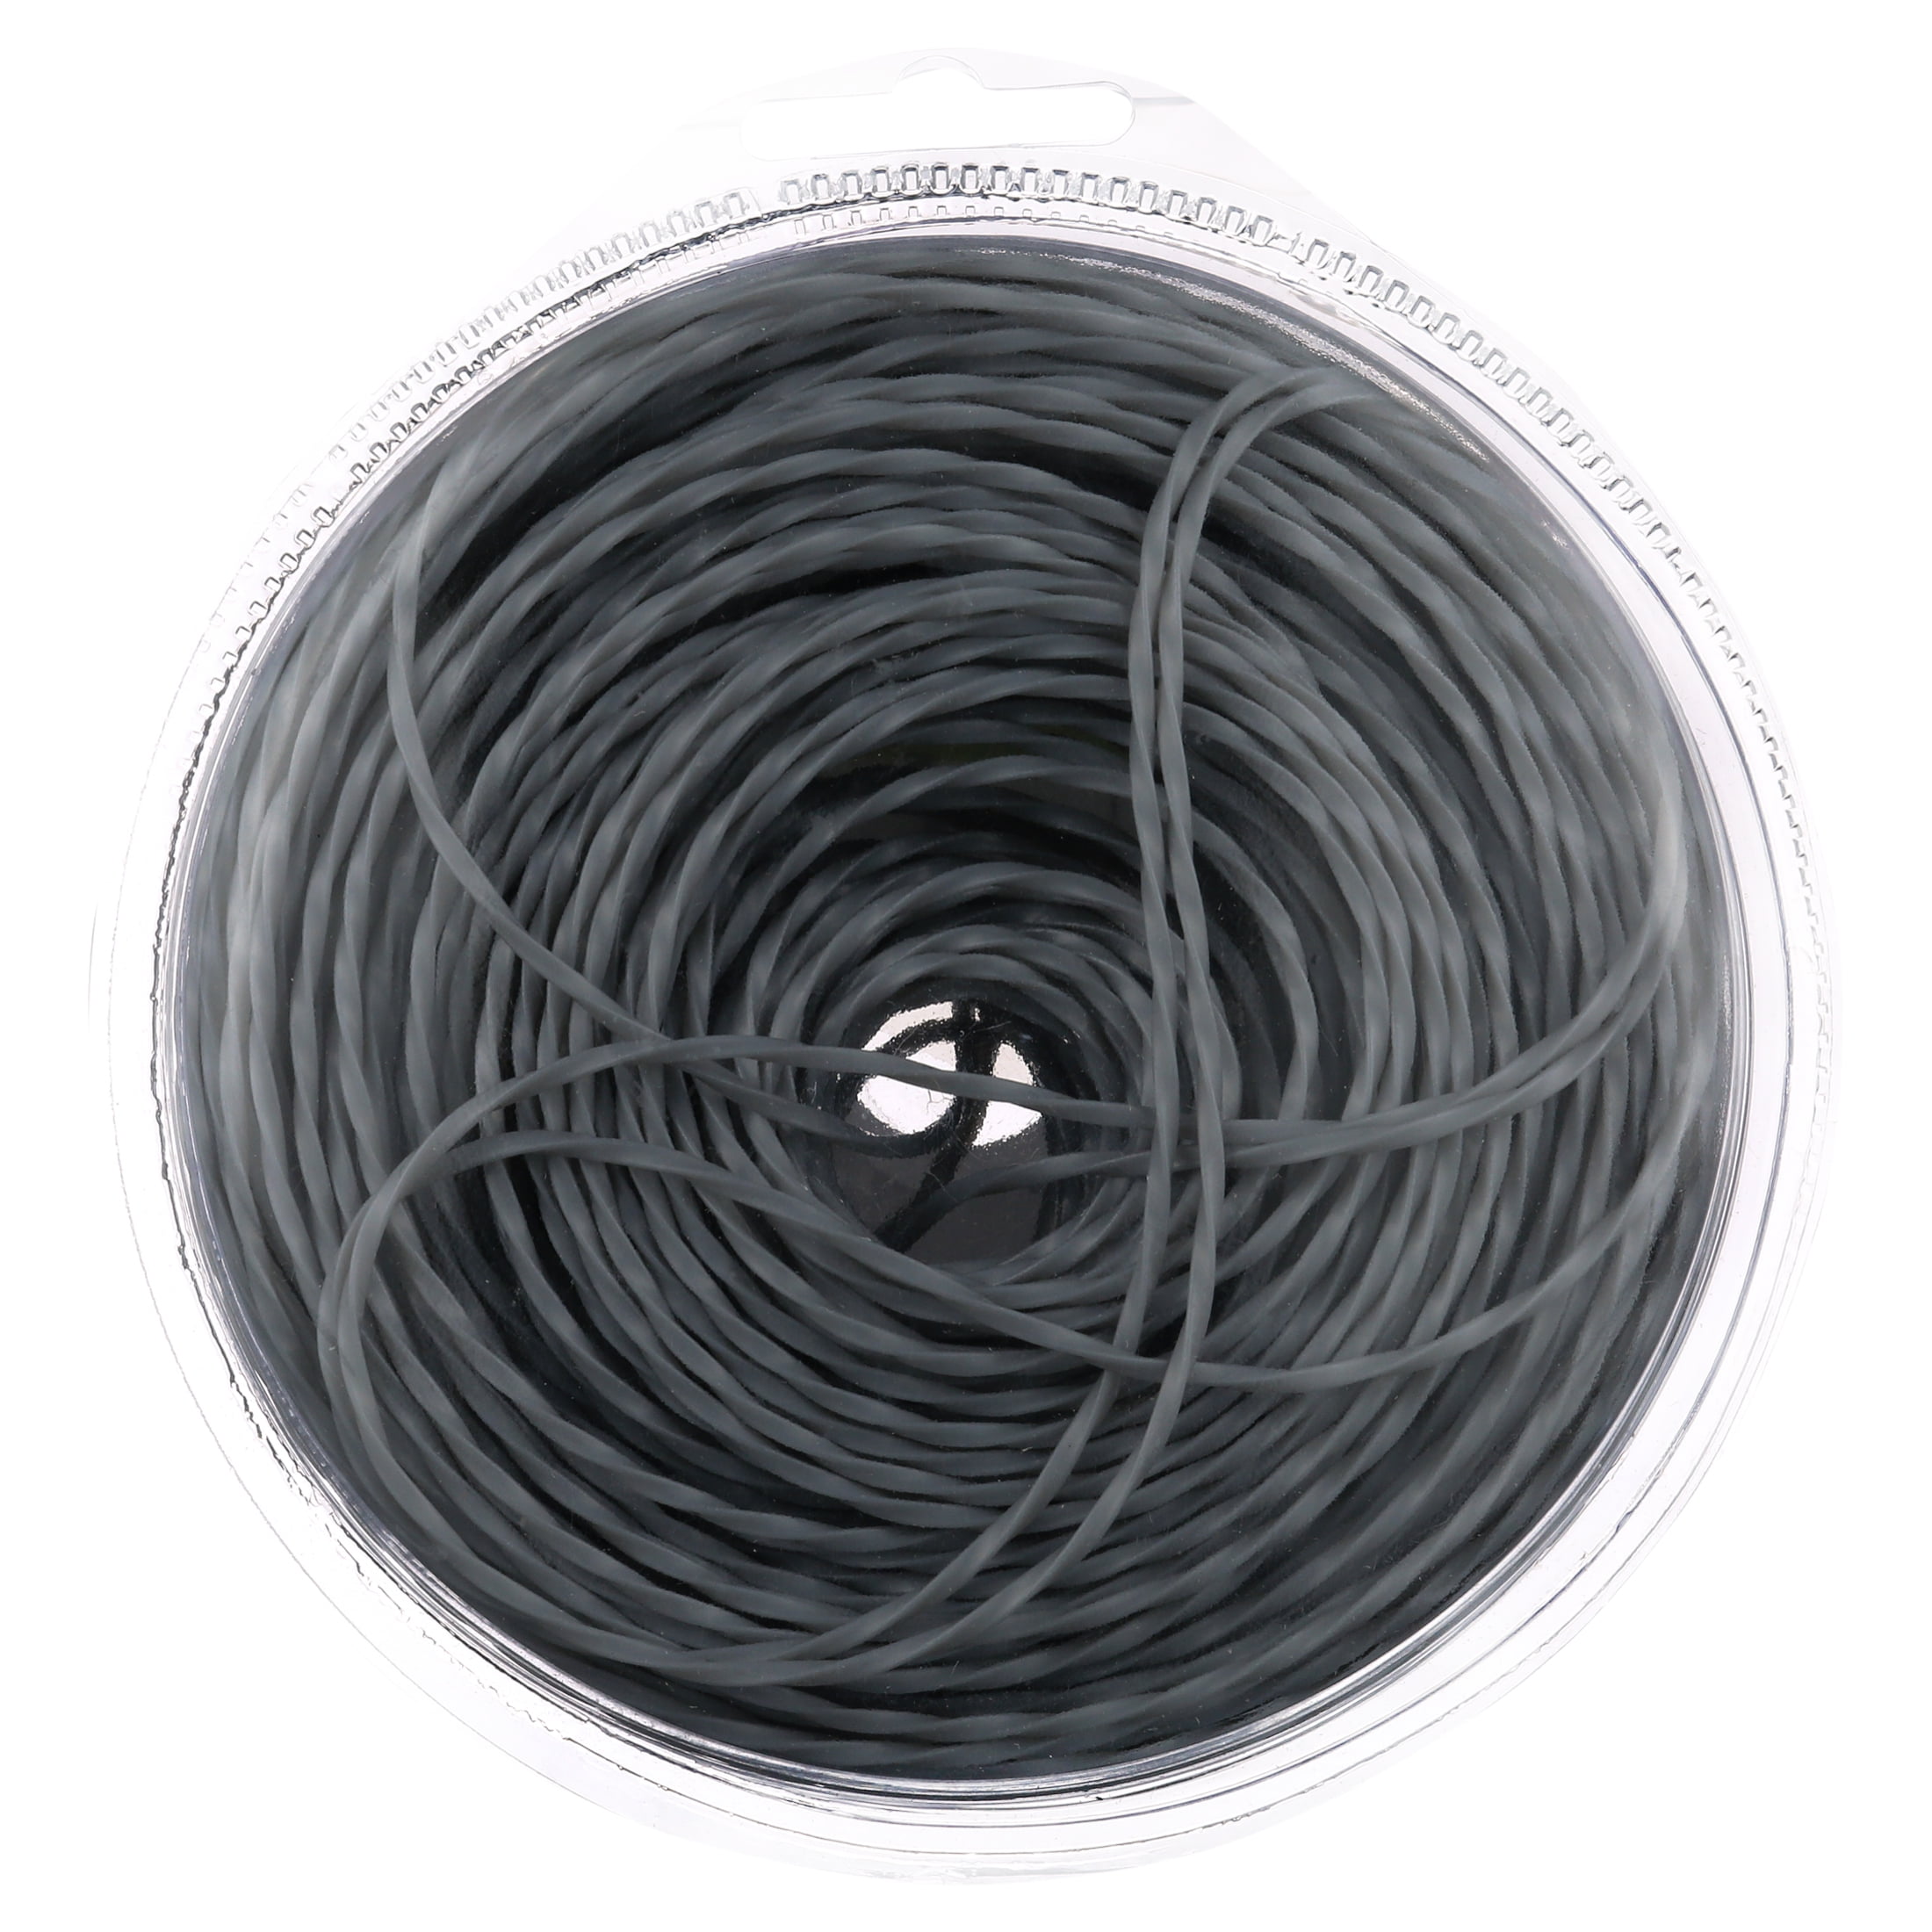 Weed Warrior® .065 x 30' Nylon Trimmer Line Spools (Fits Black